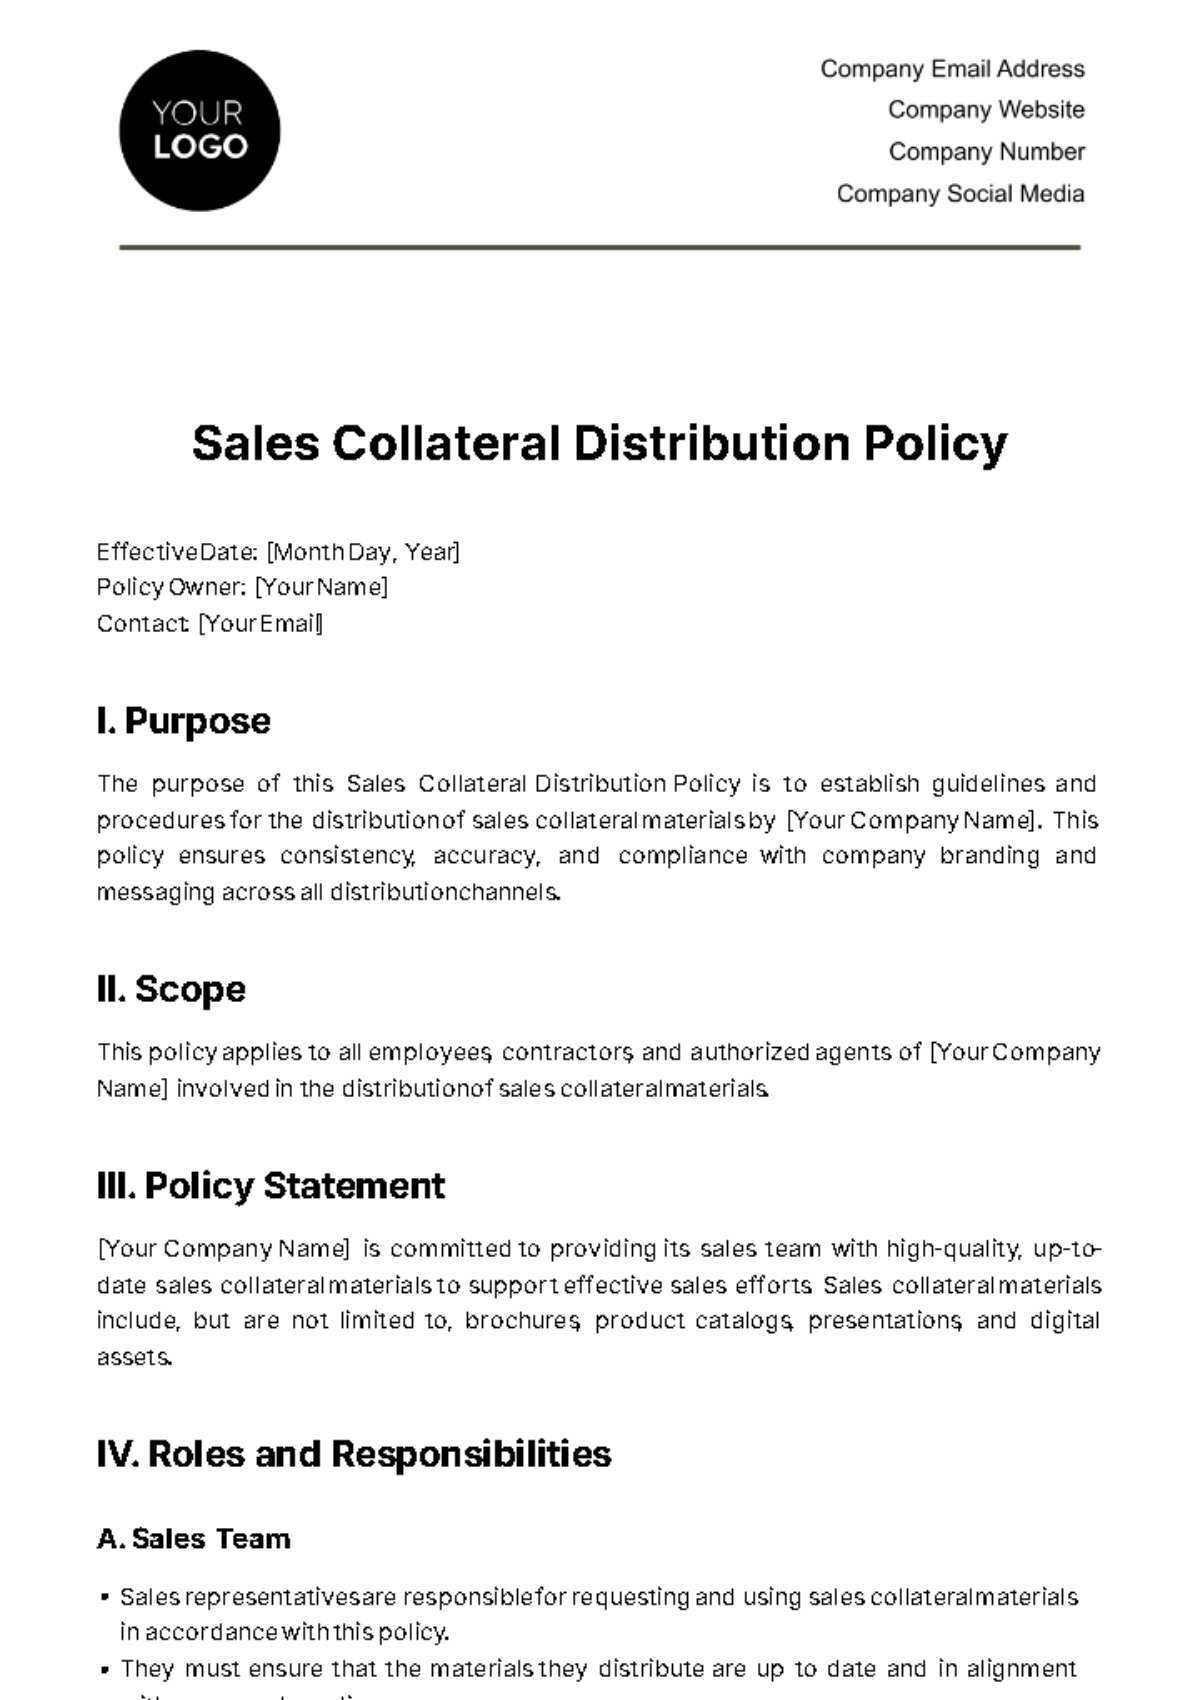 Sales Collateral Distribution Policy Template